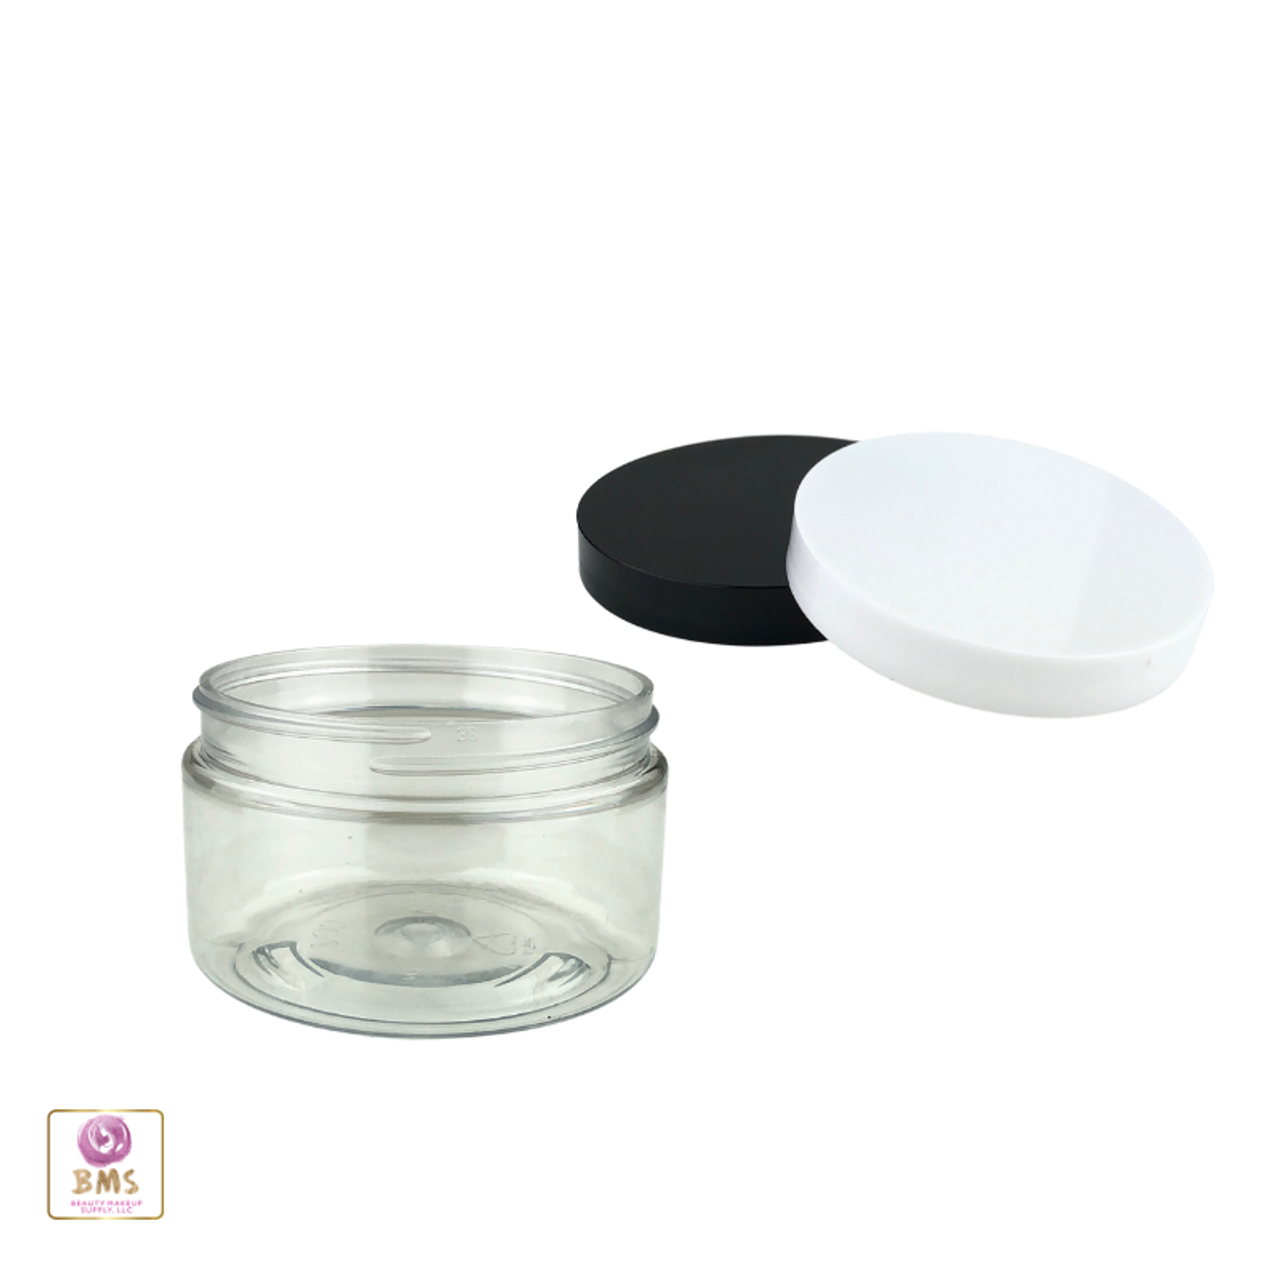 https://cdn11.bigcommerce.com/s-qd7k5gxi/images/stencil/1280x1280/products/579/6014/4_oz_heavy_wall_clear_jar_9371_9372_beauty_makeup_supply__26390.1620095962.png?c=2